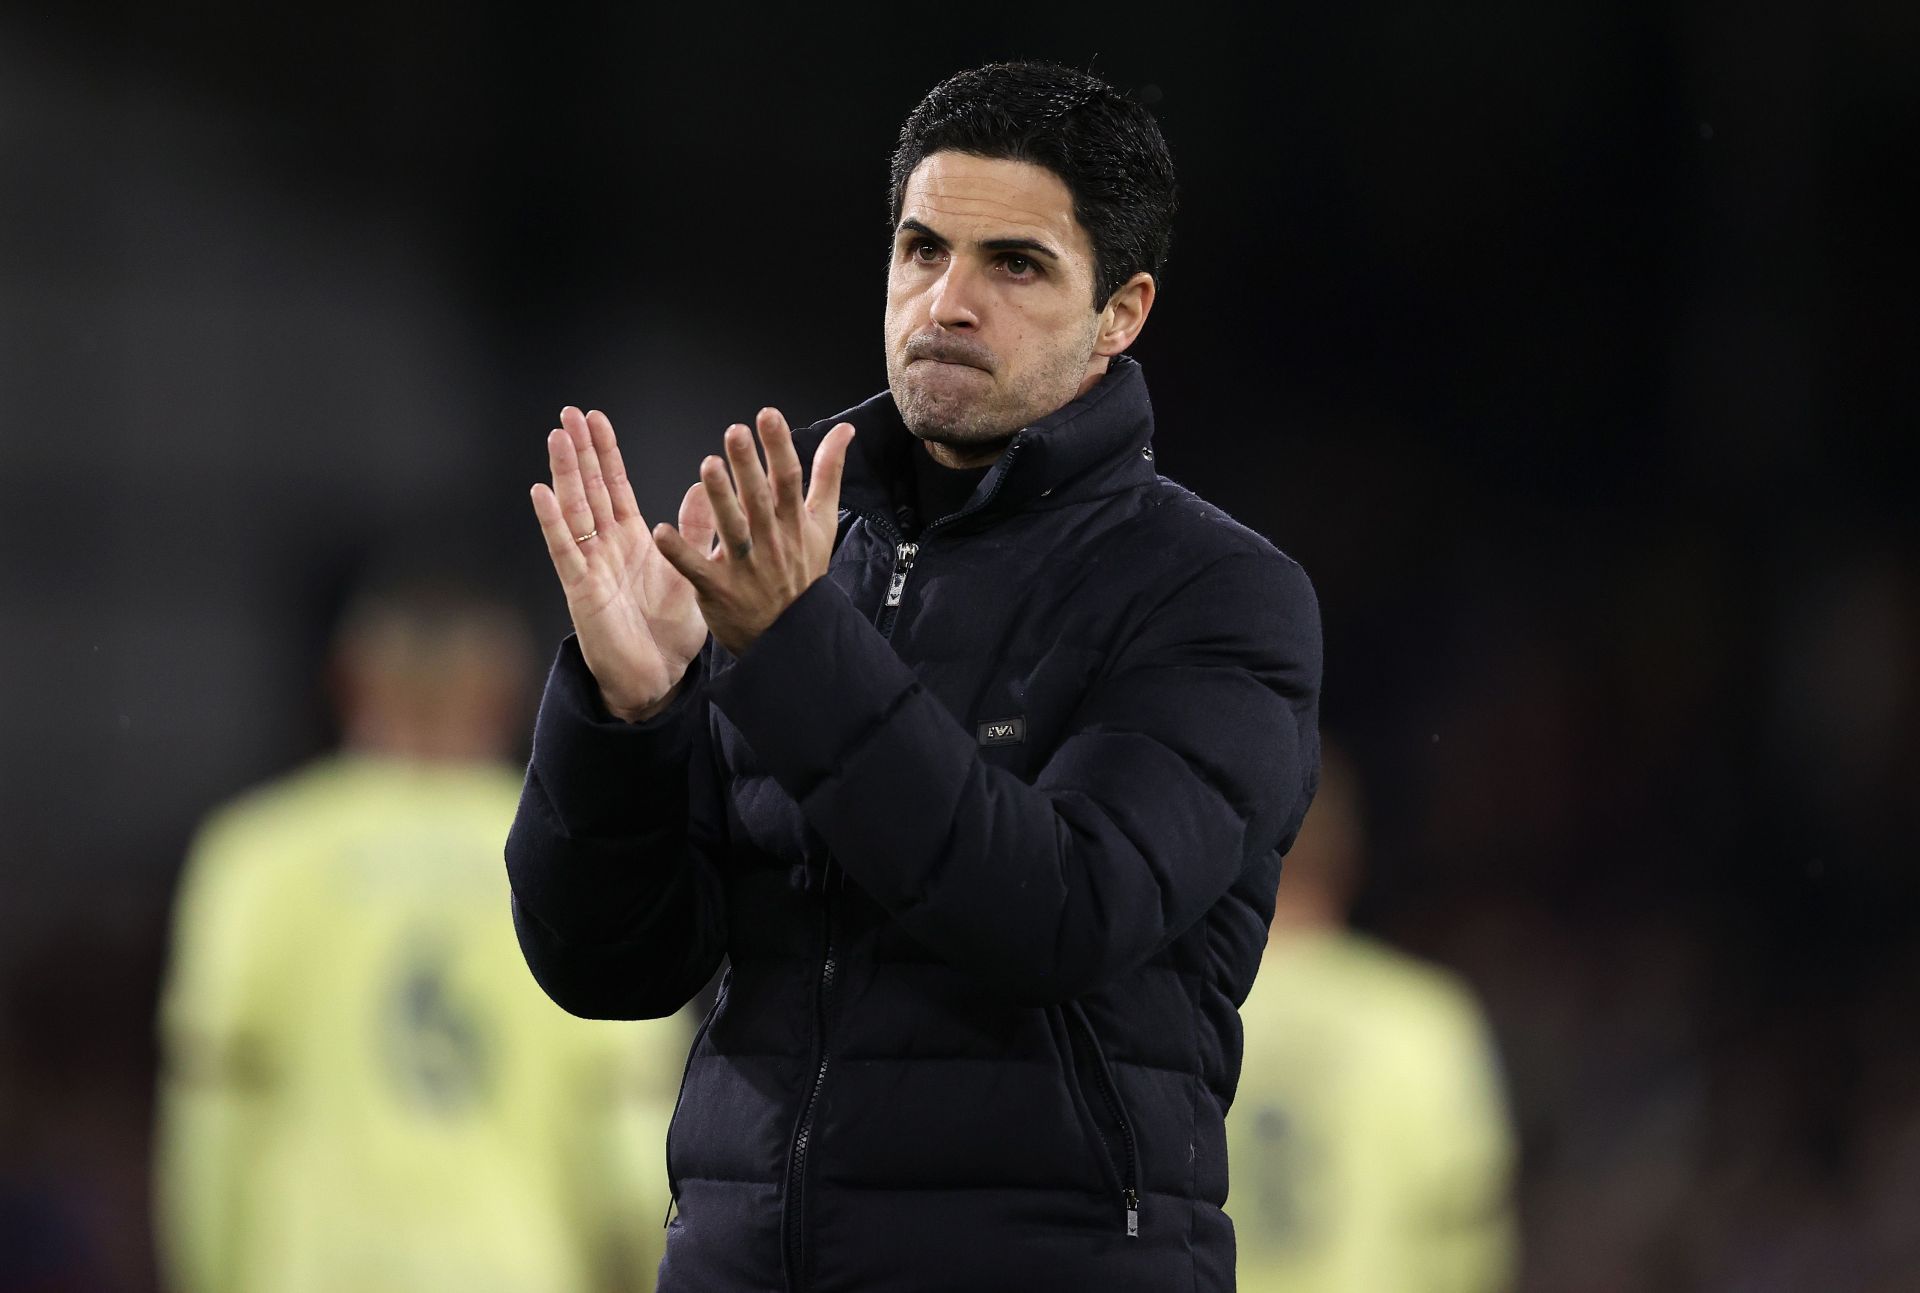 Arsenal manager Mikel Arteta is planning to get the better of Leeds United.